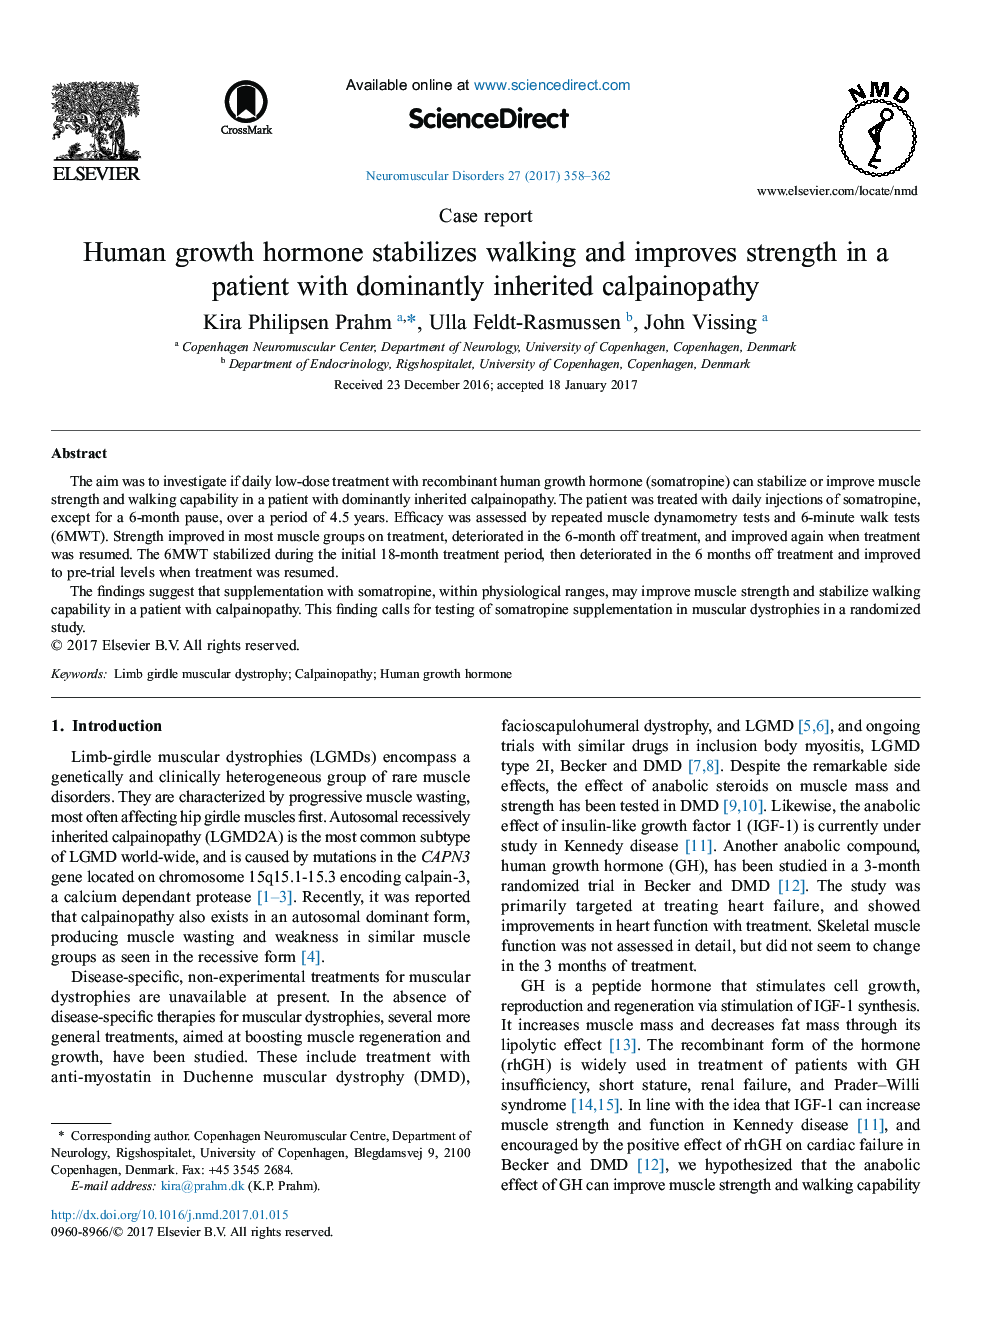 Human growth hormone stabilizes walking and improves strength in a patient with dominantly inherited calpainopathy